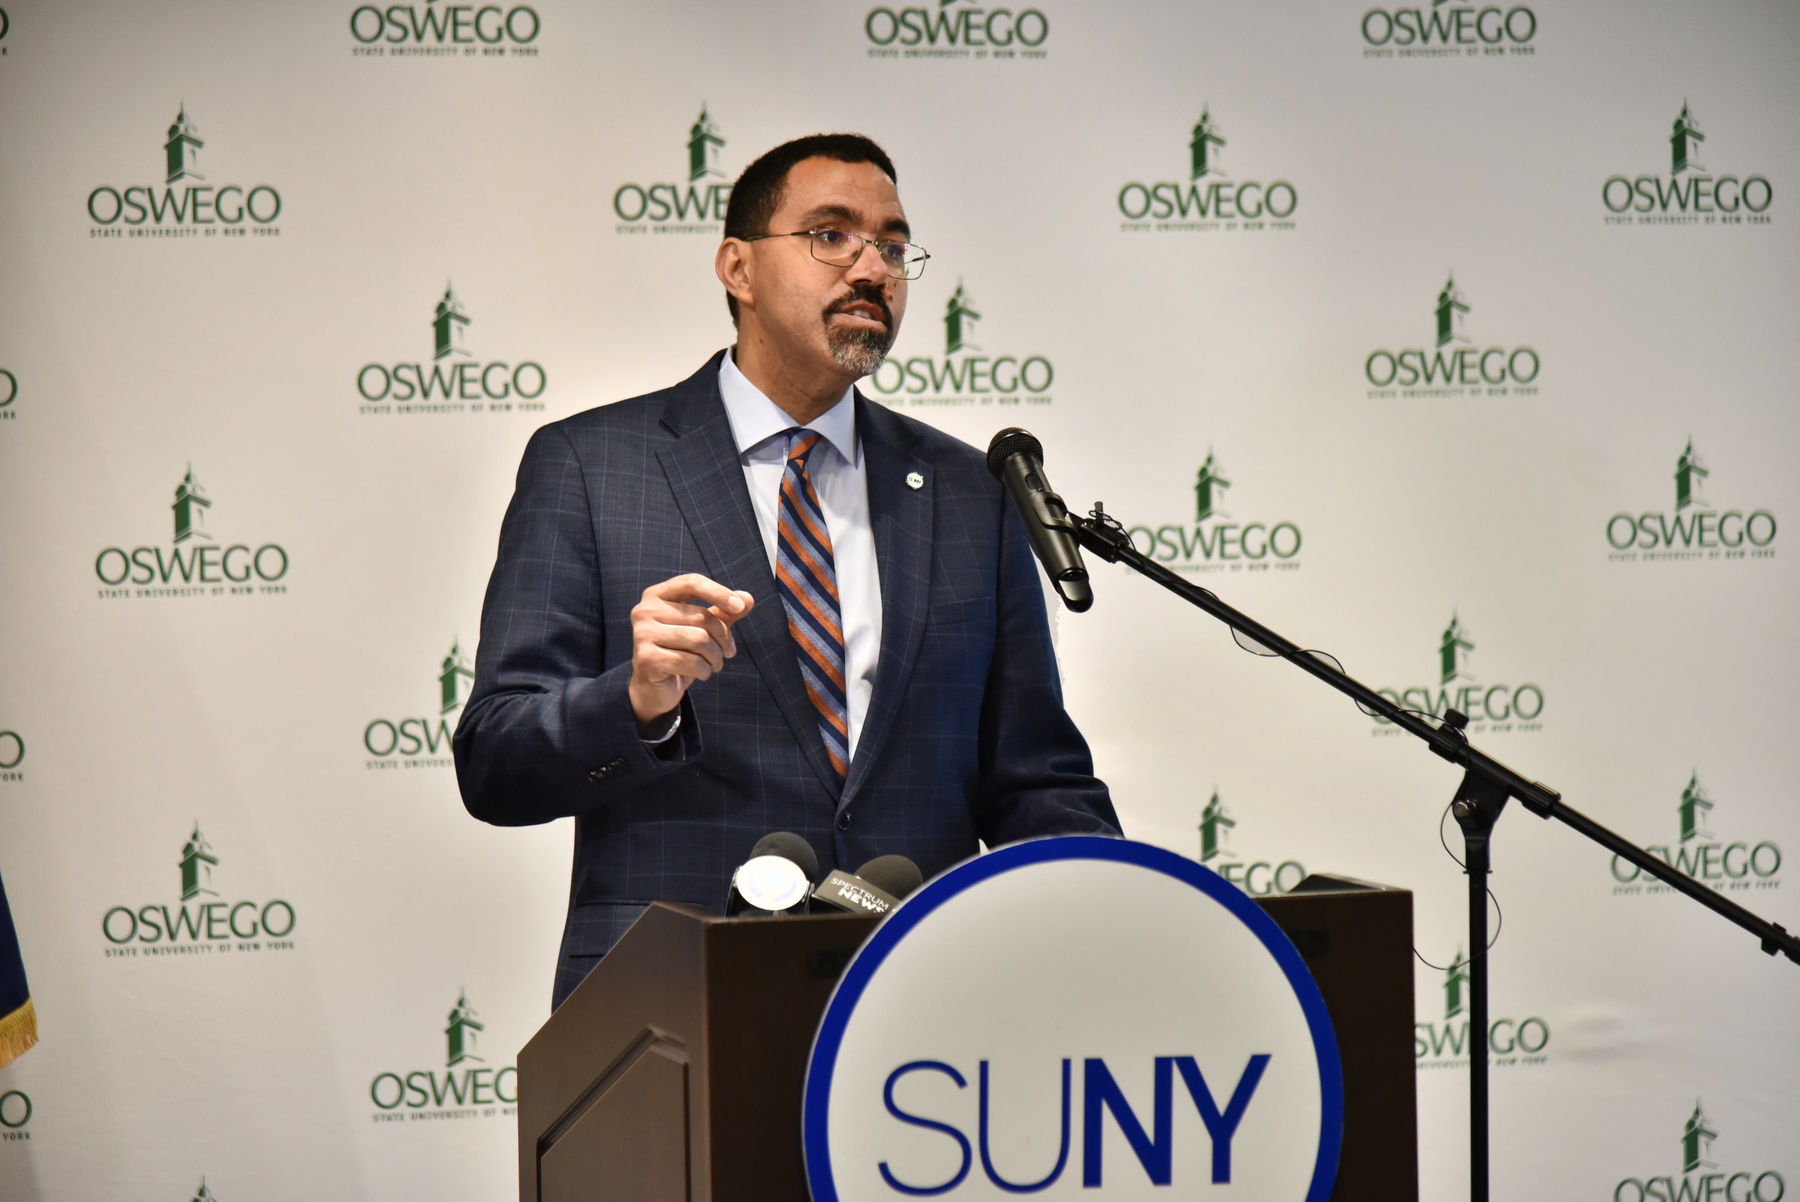 SUNY Chancellor John B. King Jr. visited SUNY Oswego Feb. 14 to meet with President Peter O. Nwosu and students, employees and several offices, concluding the visit with a press conference held in The Space announcing enhanced mental health support funding to Oswego and other SUNY institutions.